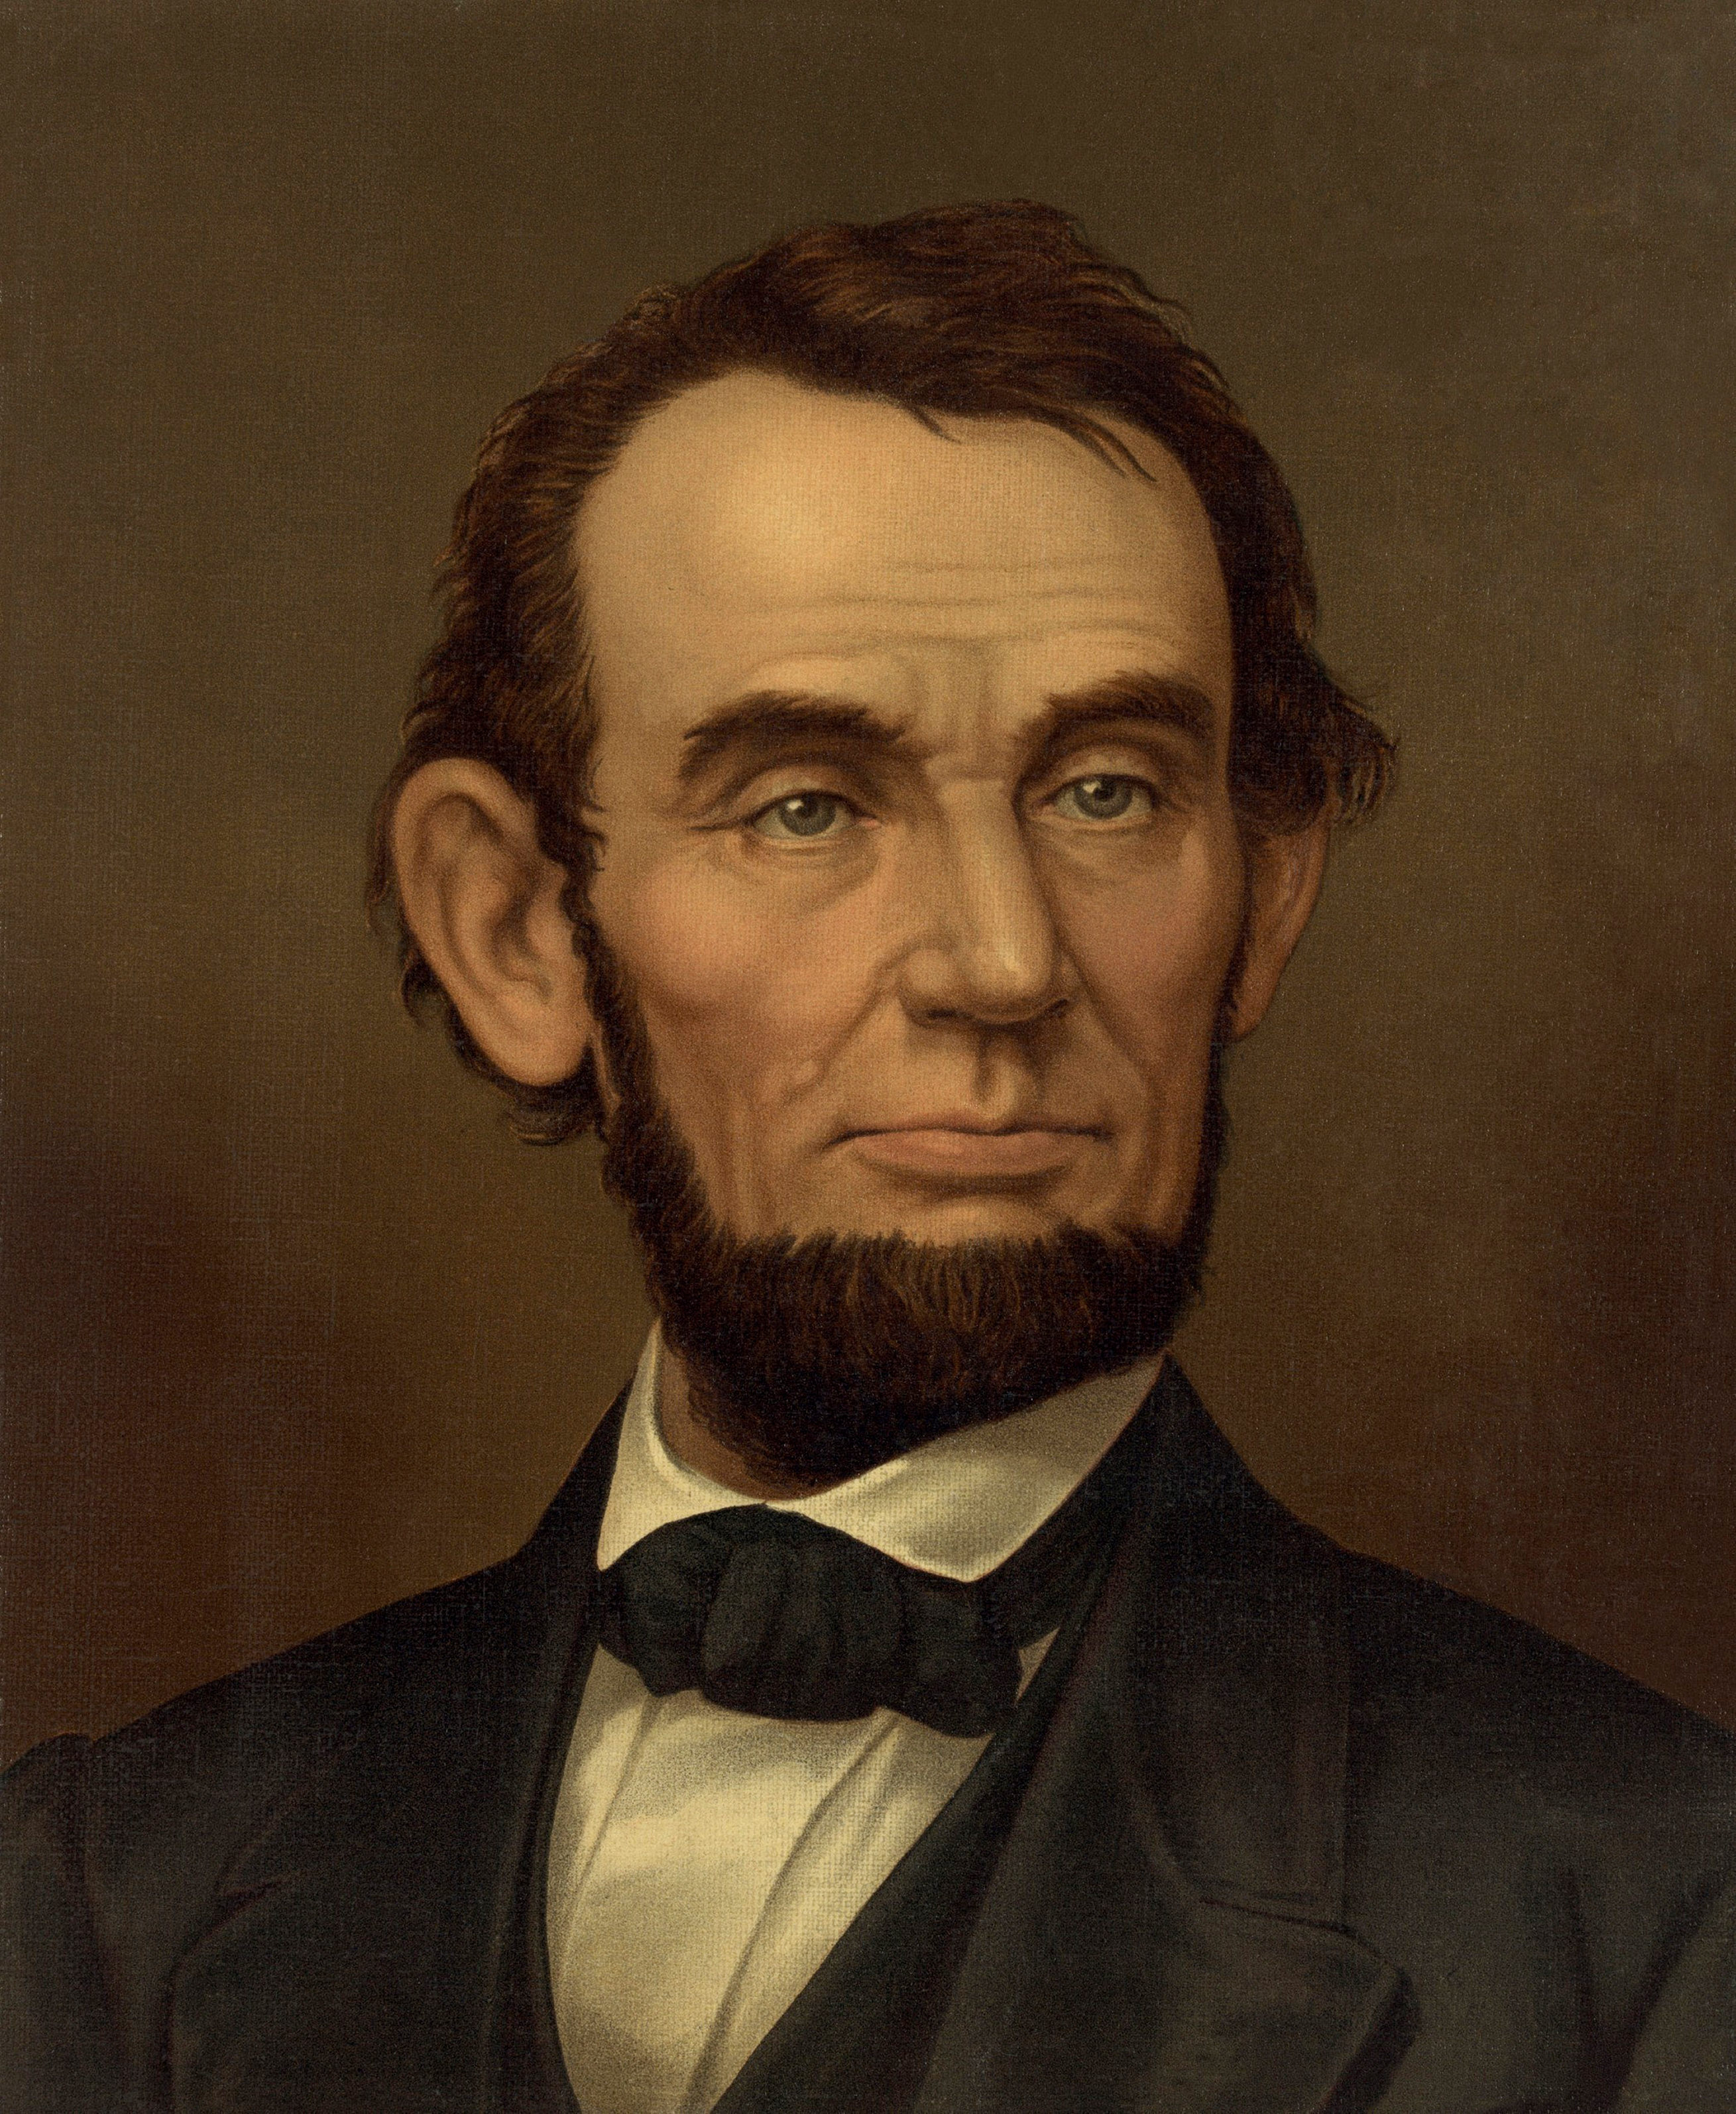 The Presidential Selection Abraham Lincoln